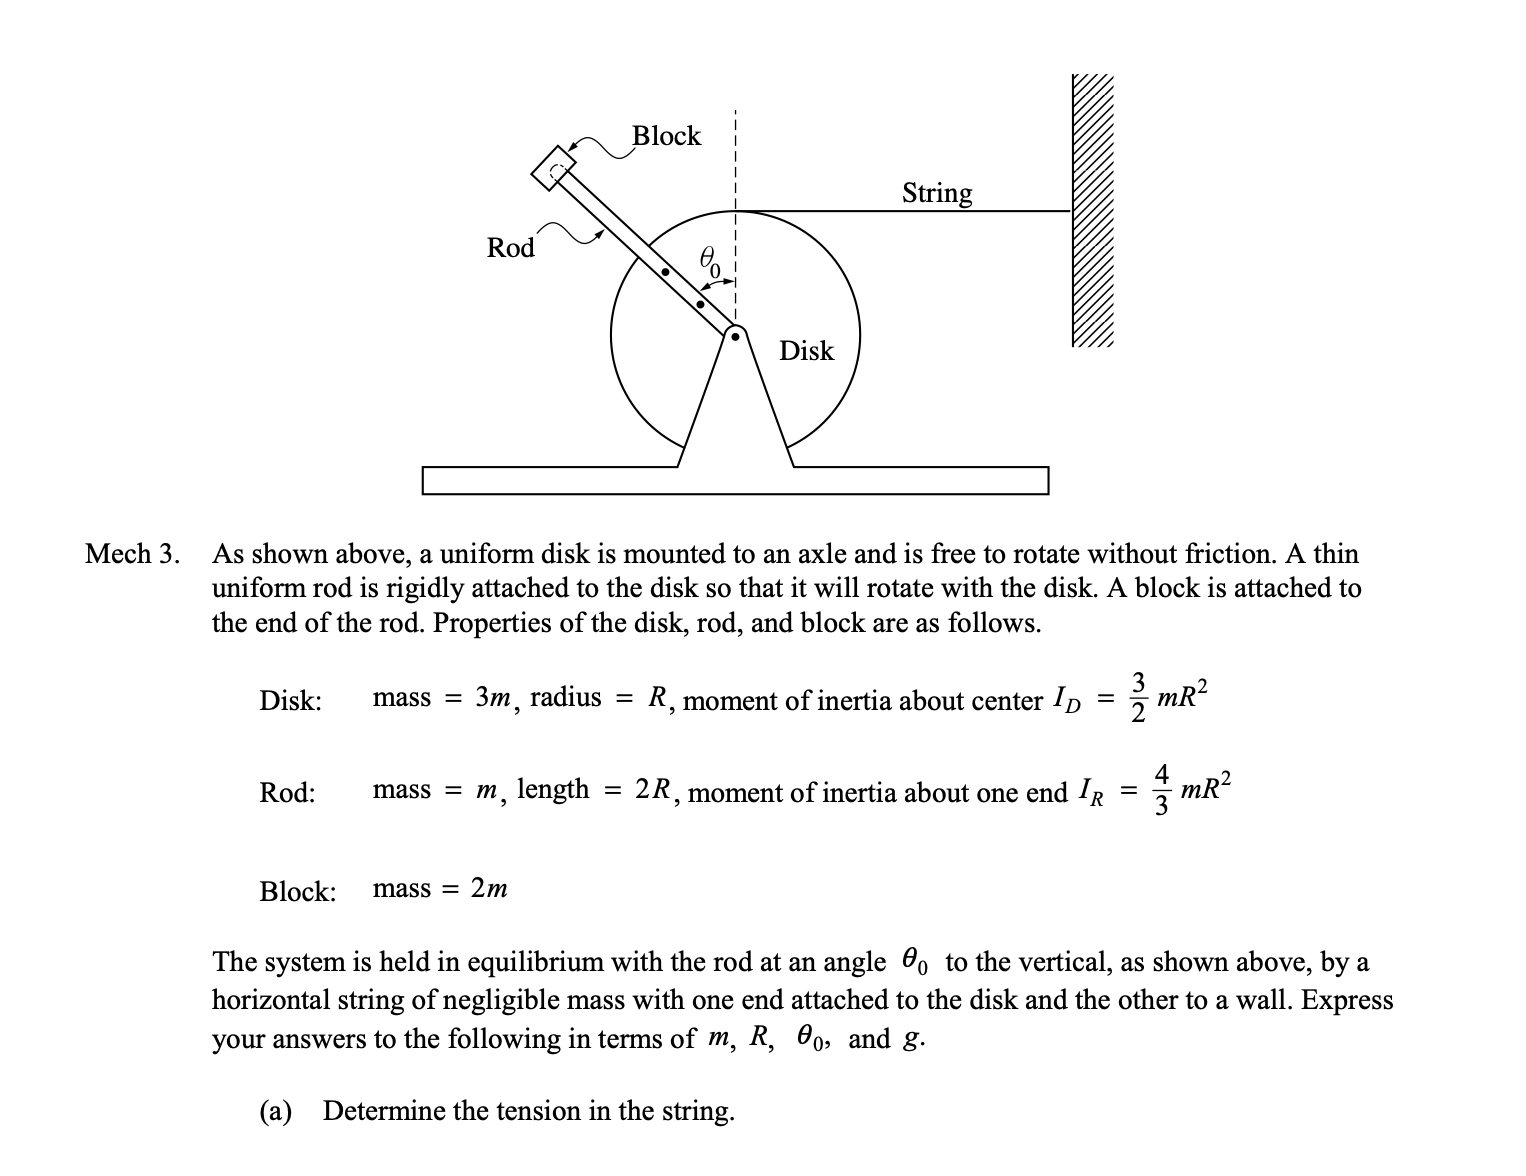 Block
String
Rod
Disk
Mech 3.
As shown above, a uniform disk is mounted to an axle and is free to rotate without friction. A thin
uniform rod is rigidly attached to the disk so that it will rotate with the disk. A block is attached to
the end of the rod. Properties of the disk, rod, and block are as follows.
Disk:
Зт, radius
R, moment of inertia about center ID = mR²
mass =
%3D
Rod:
m, length = 2R, moment of inertia about one end IR
mR?
mass =
Block:
mass =
2m
The system is held in equilibrium with the rod at an angle 0, to the vertical, as shown above, by a
horizontal string of negligible mass with one end attached to the disk and the other to a wall. Express
your answers to the following in terms of m, R, 00, and g.
(a) Determine the tension in the string.
